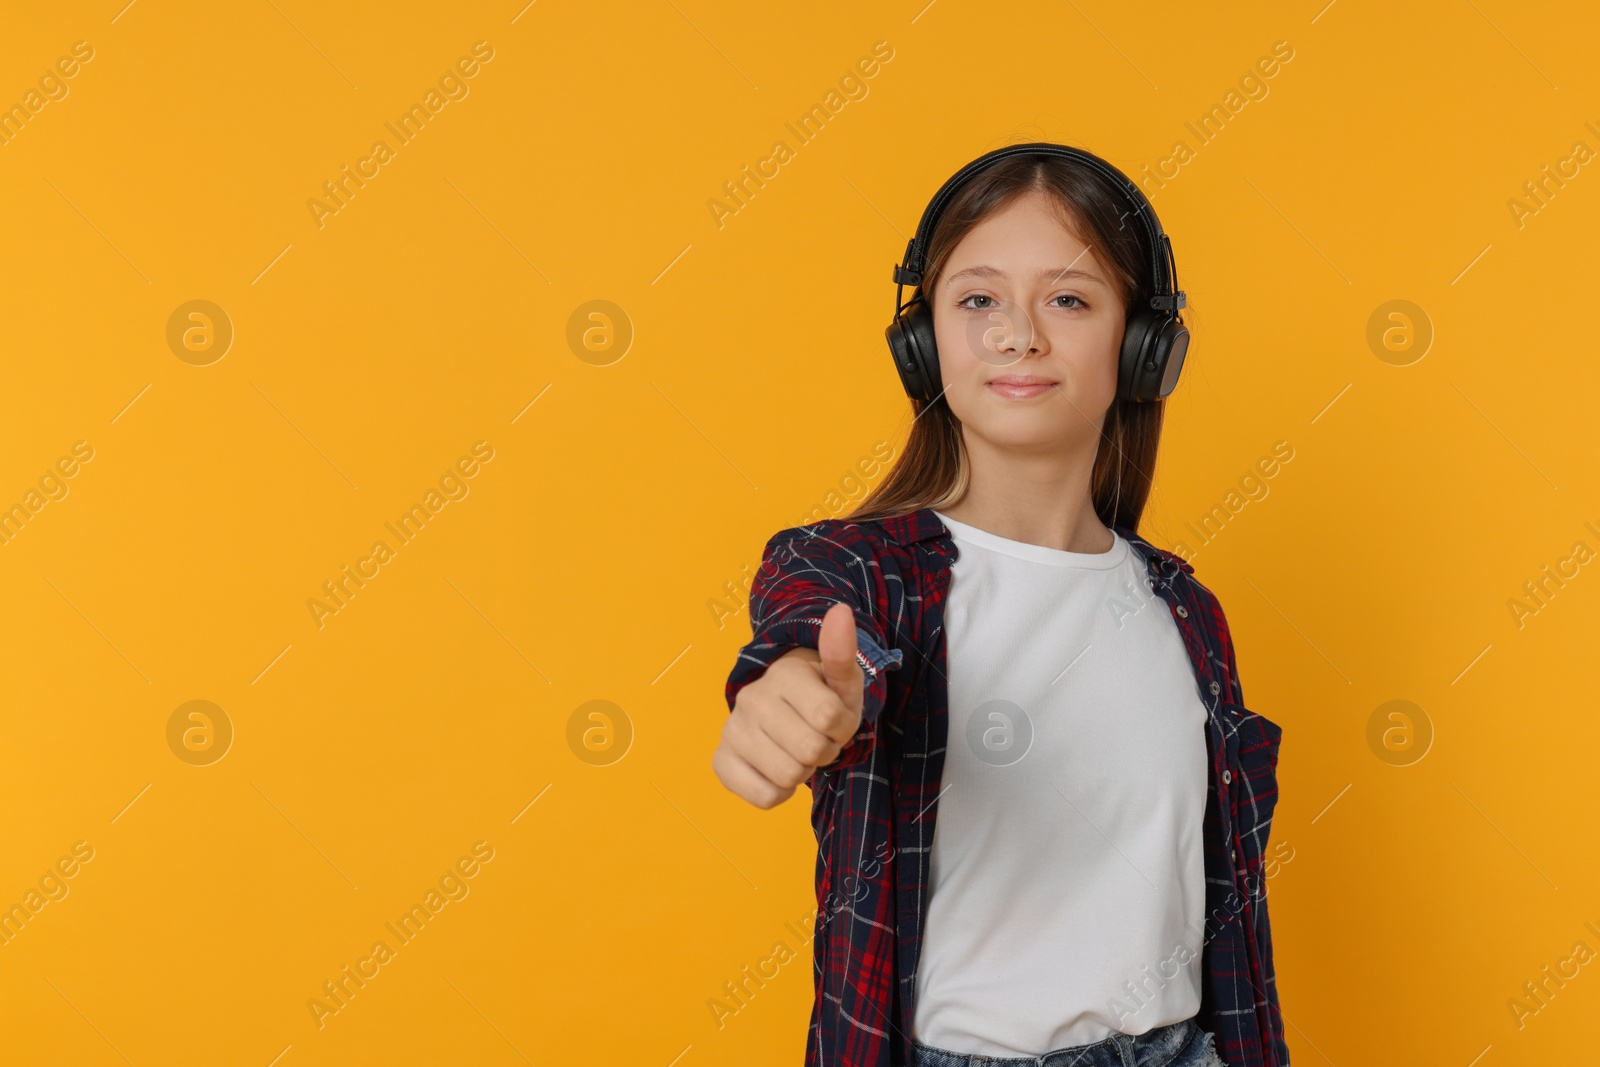 Photo of Teenage girl listening to music with headphones on orange background. Space for text